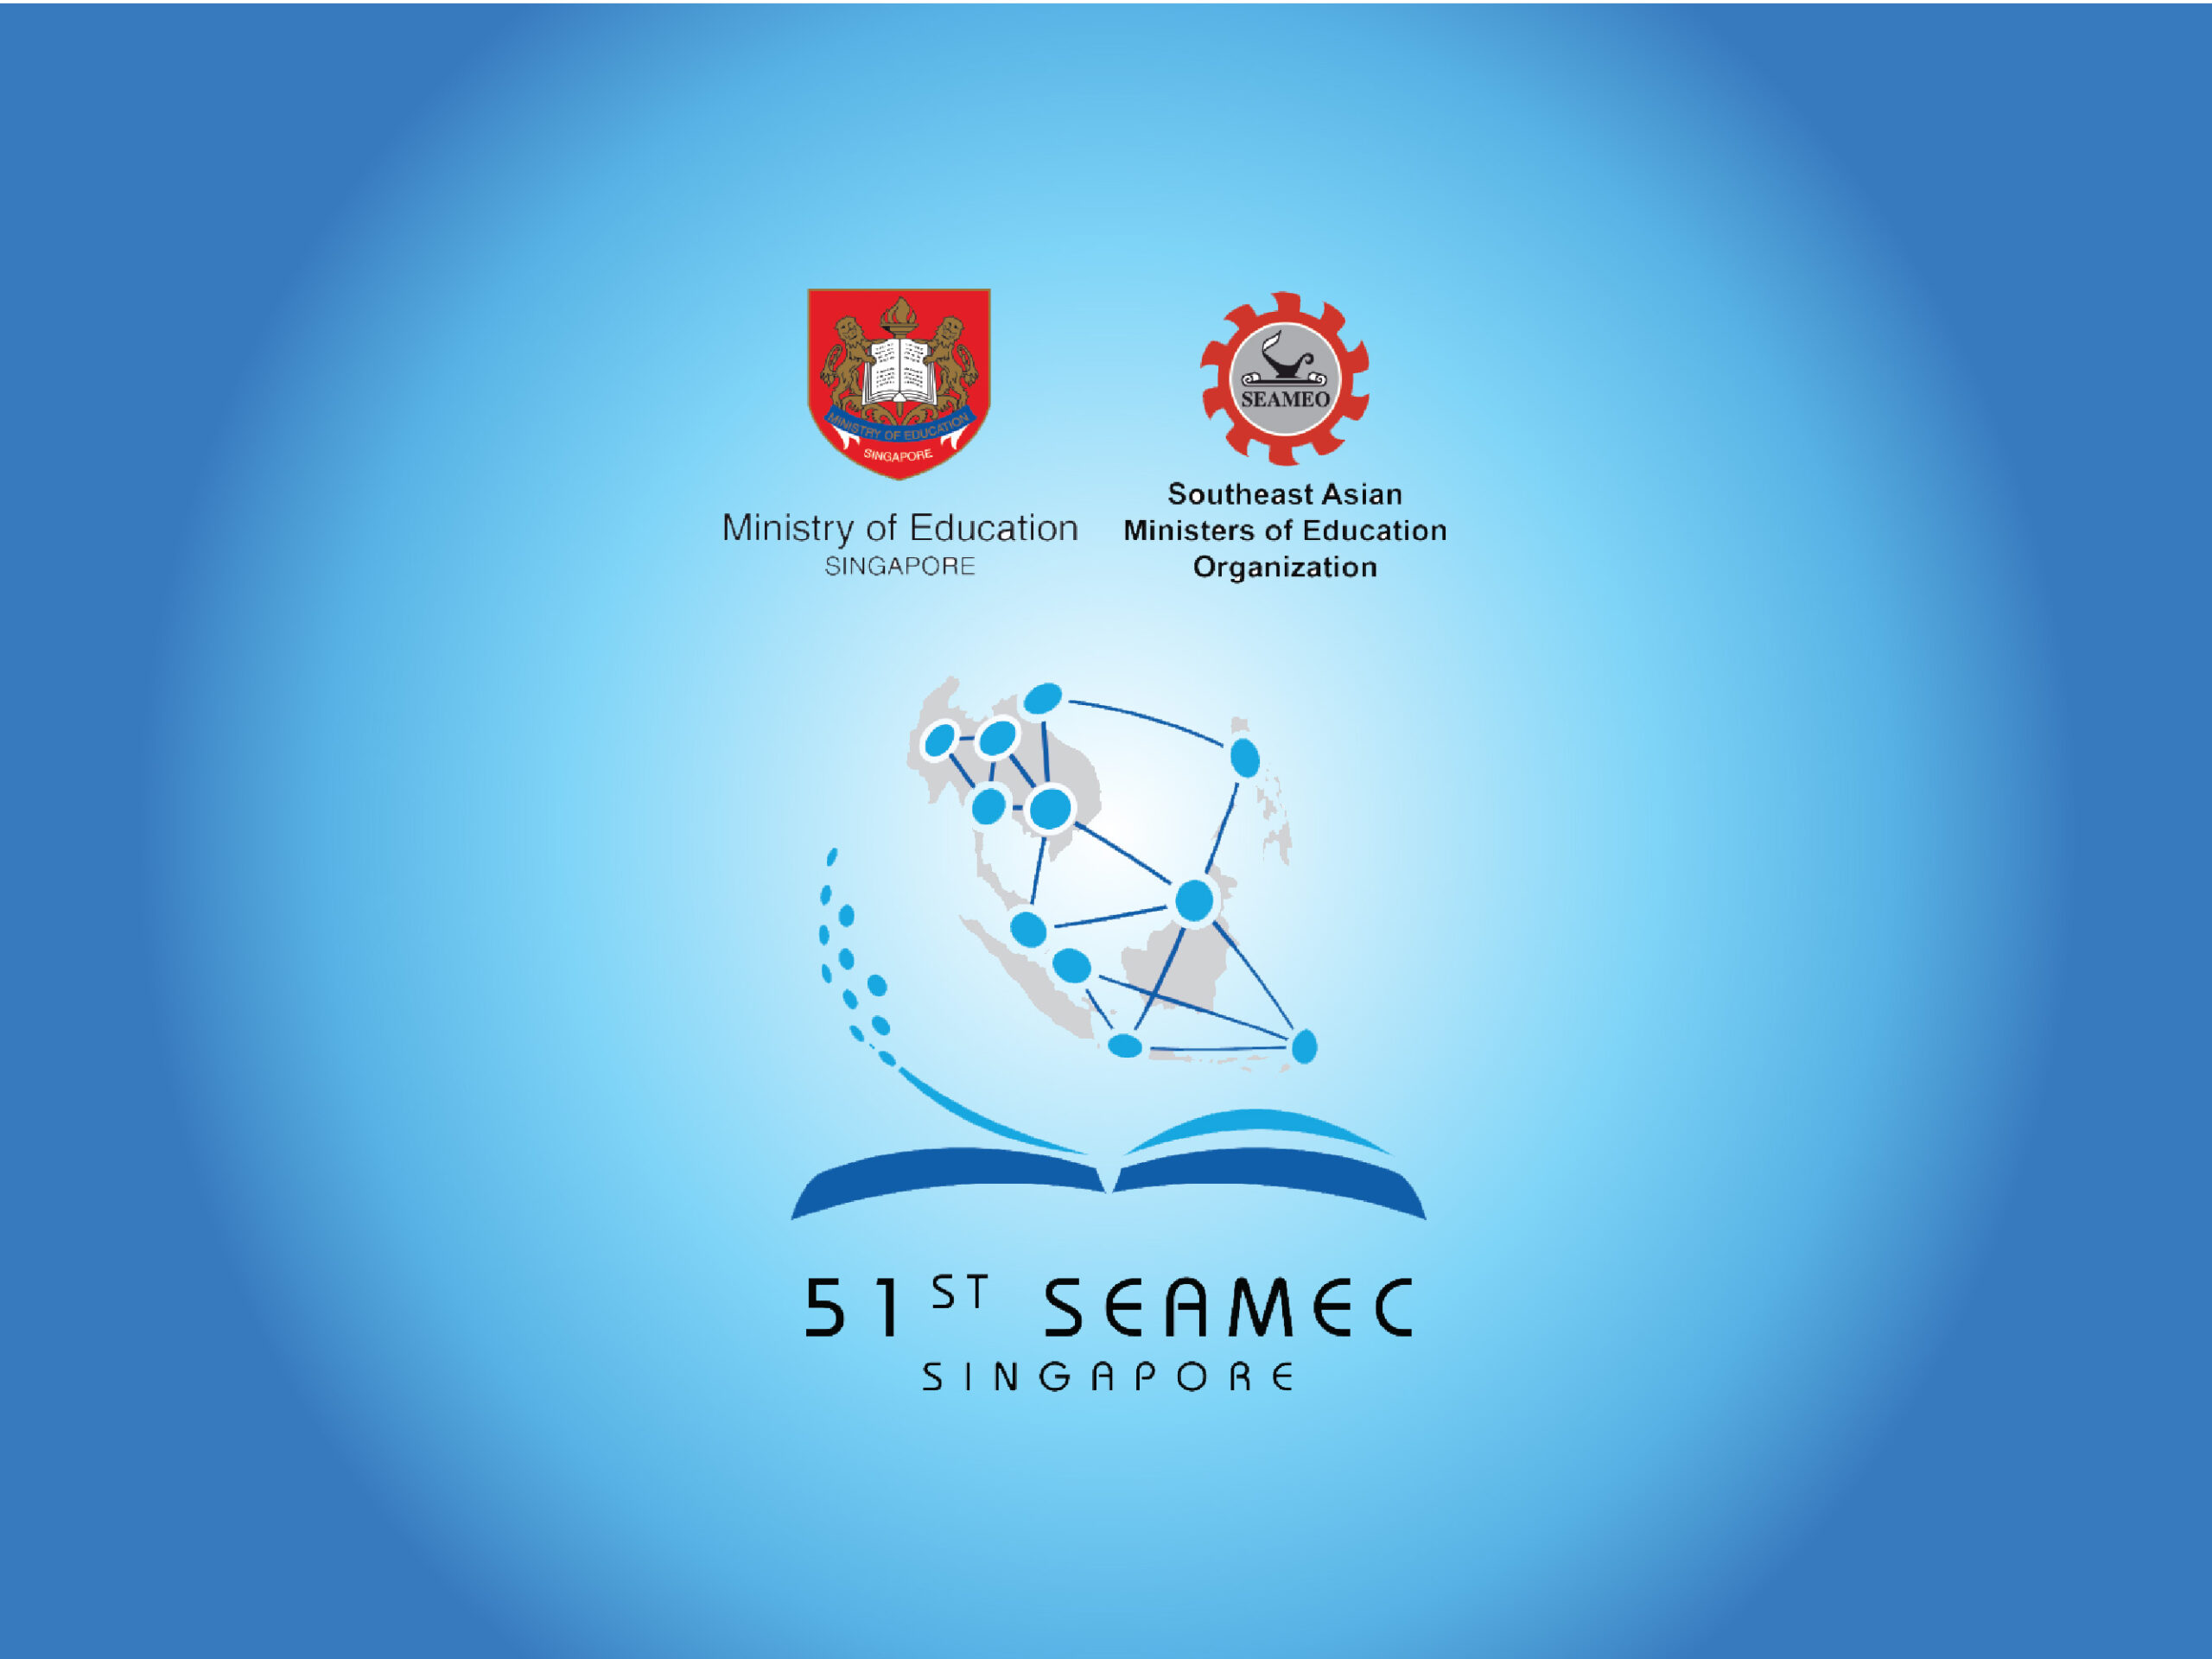 Singapore hosts the first virtual 51st SEAMEO Council Conference 2021